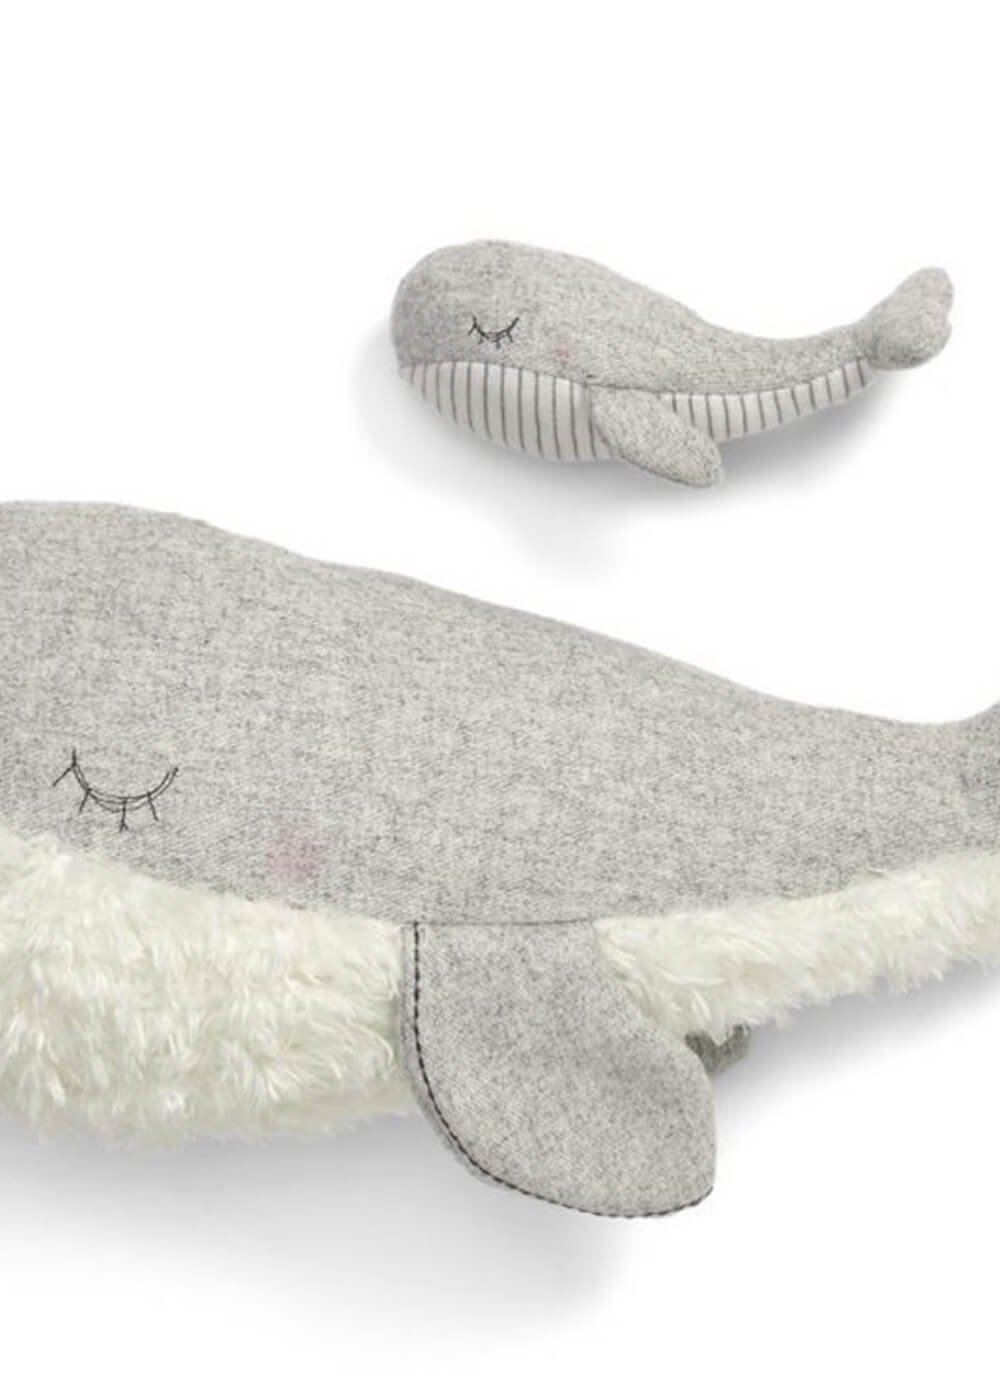 Mamas & Papas - Super Soft Whale and Baby Toy | Queen Bee